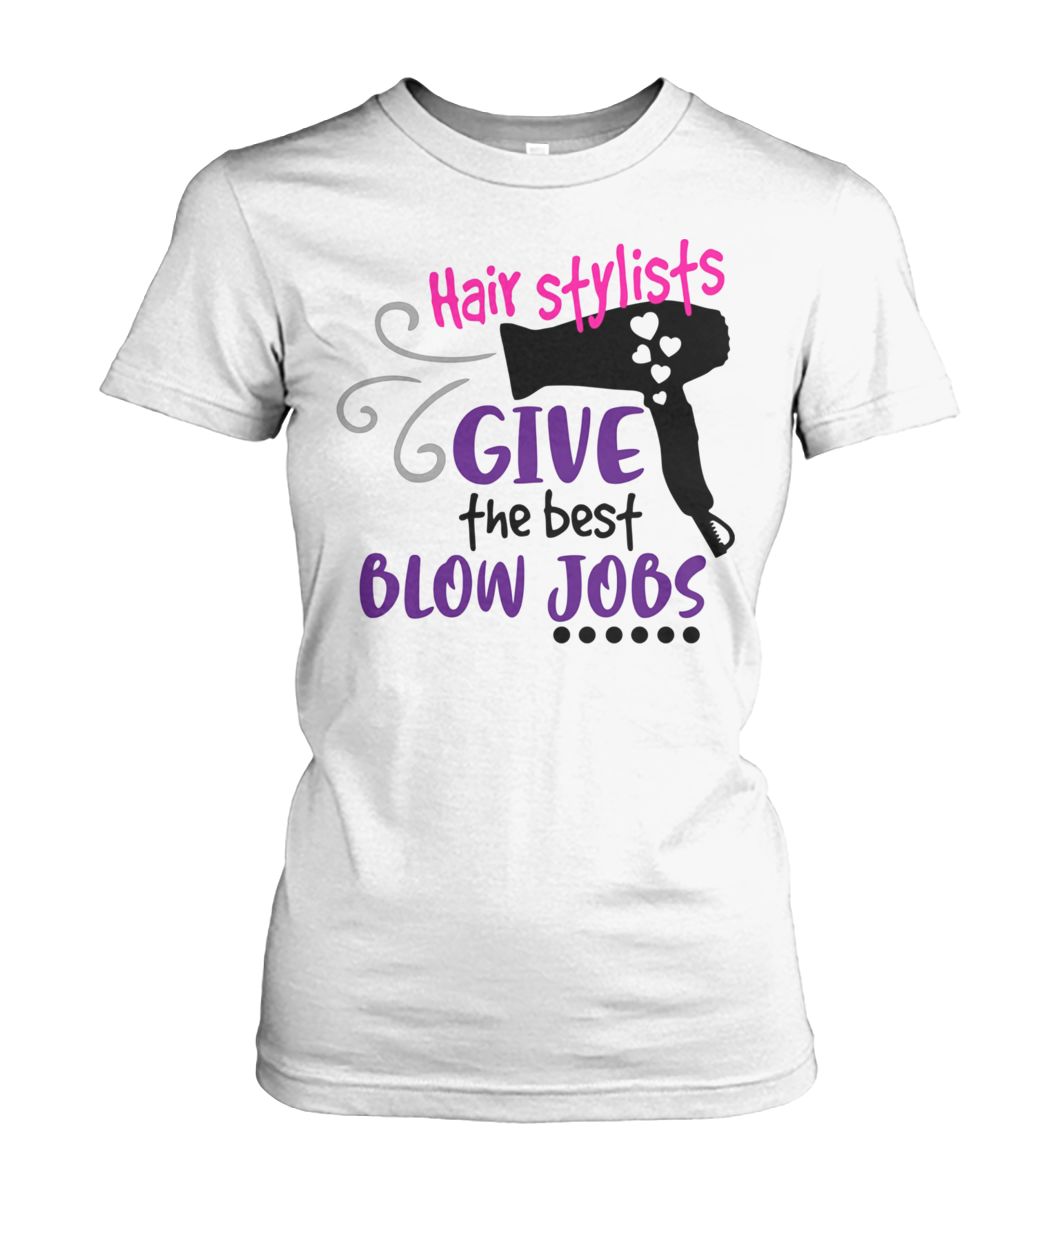 Hair stylists give the best blow jobs women's crew tee